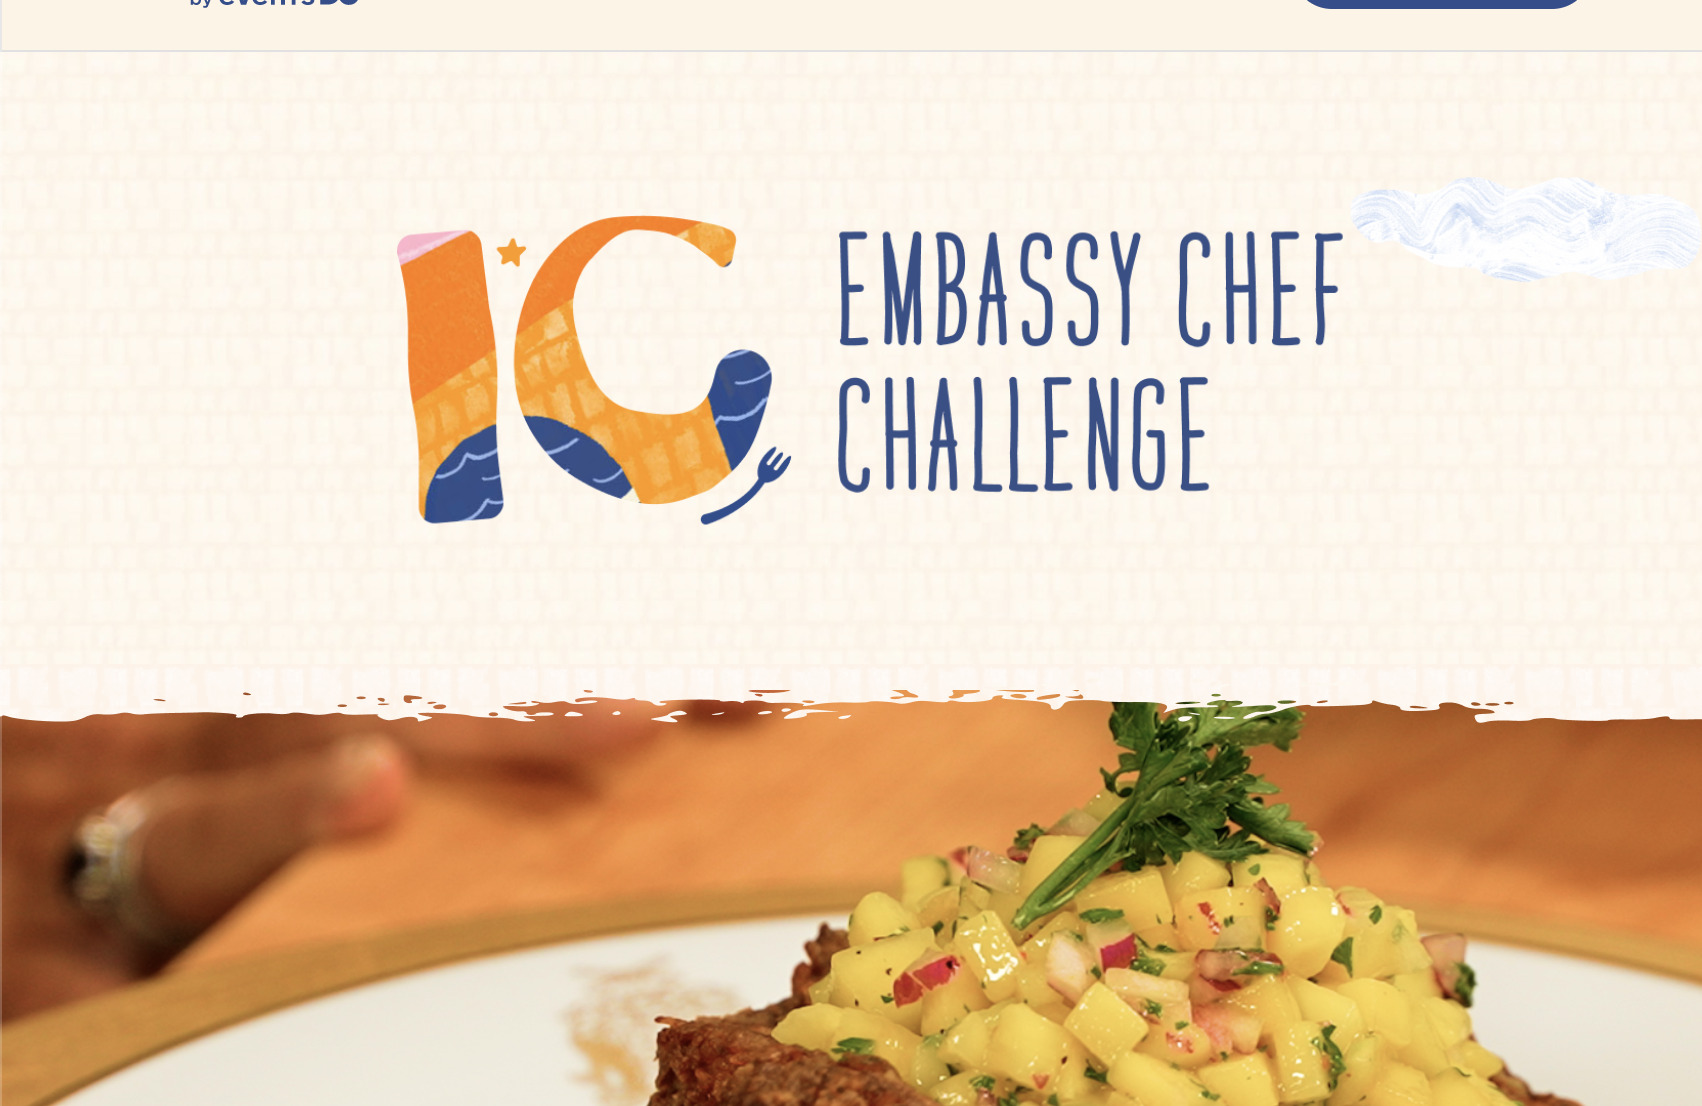 14th annual events DC Embassy Chef Challenge